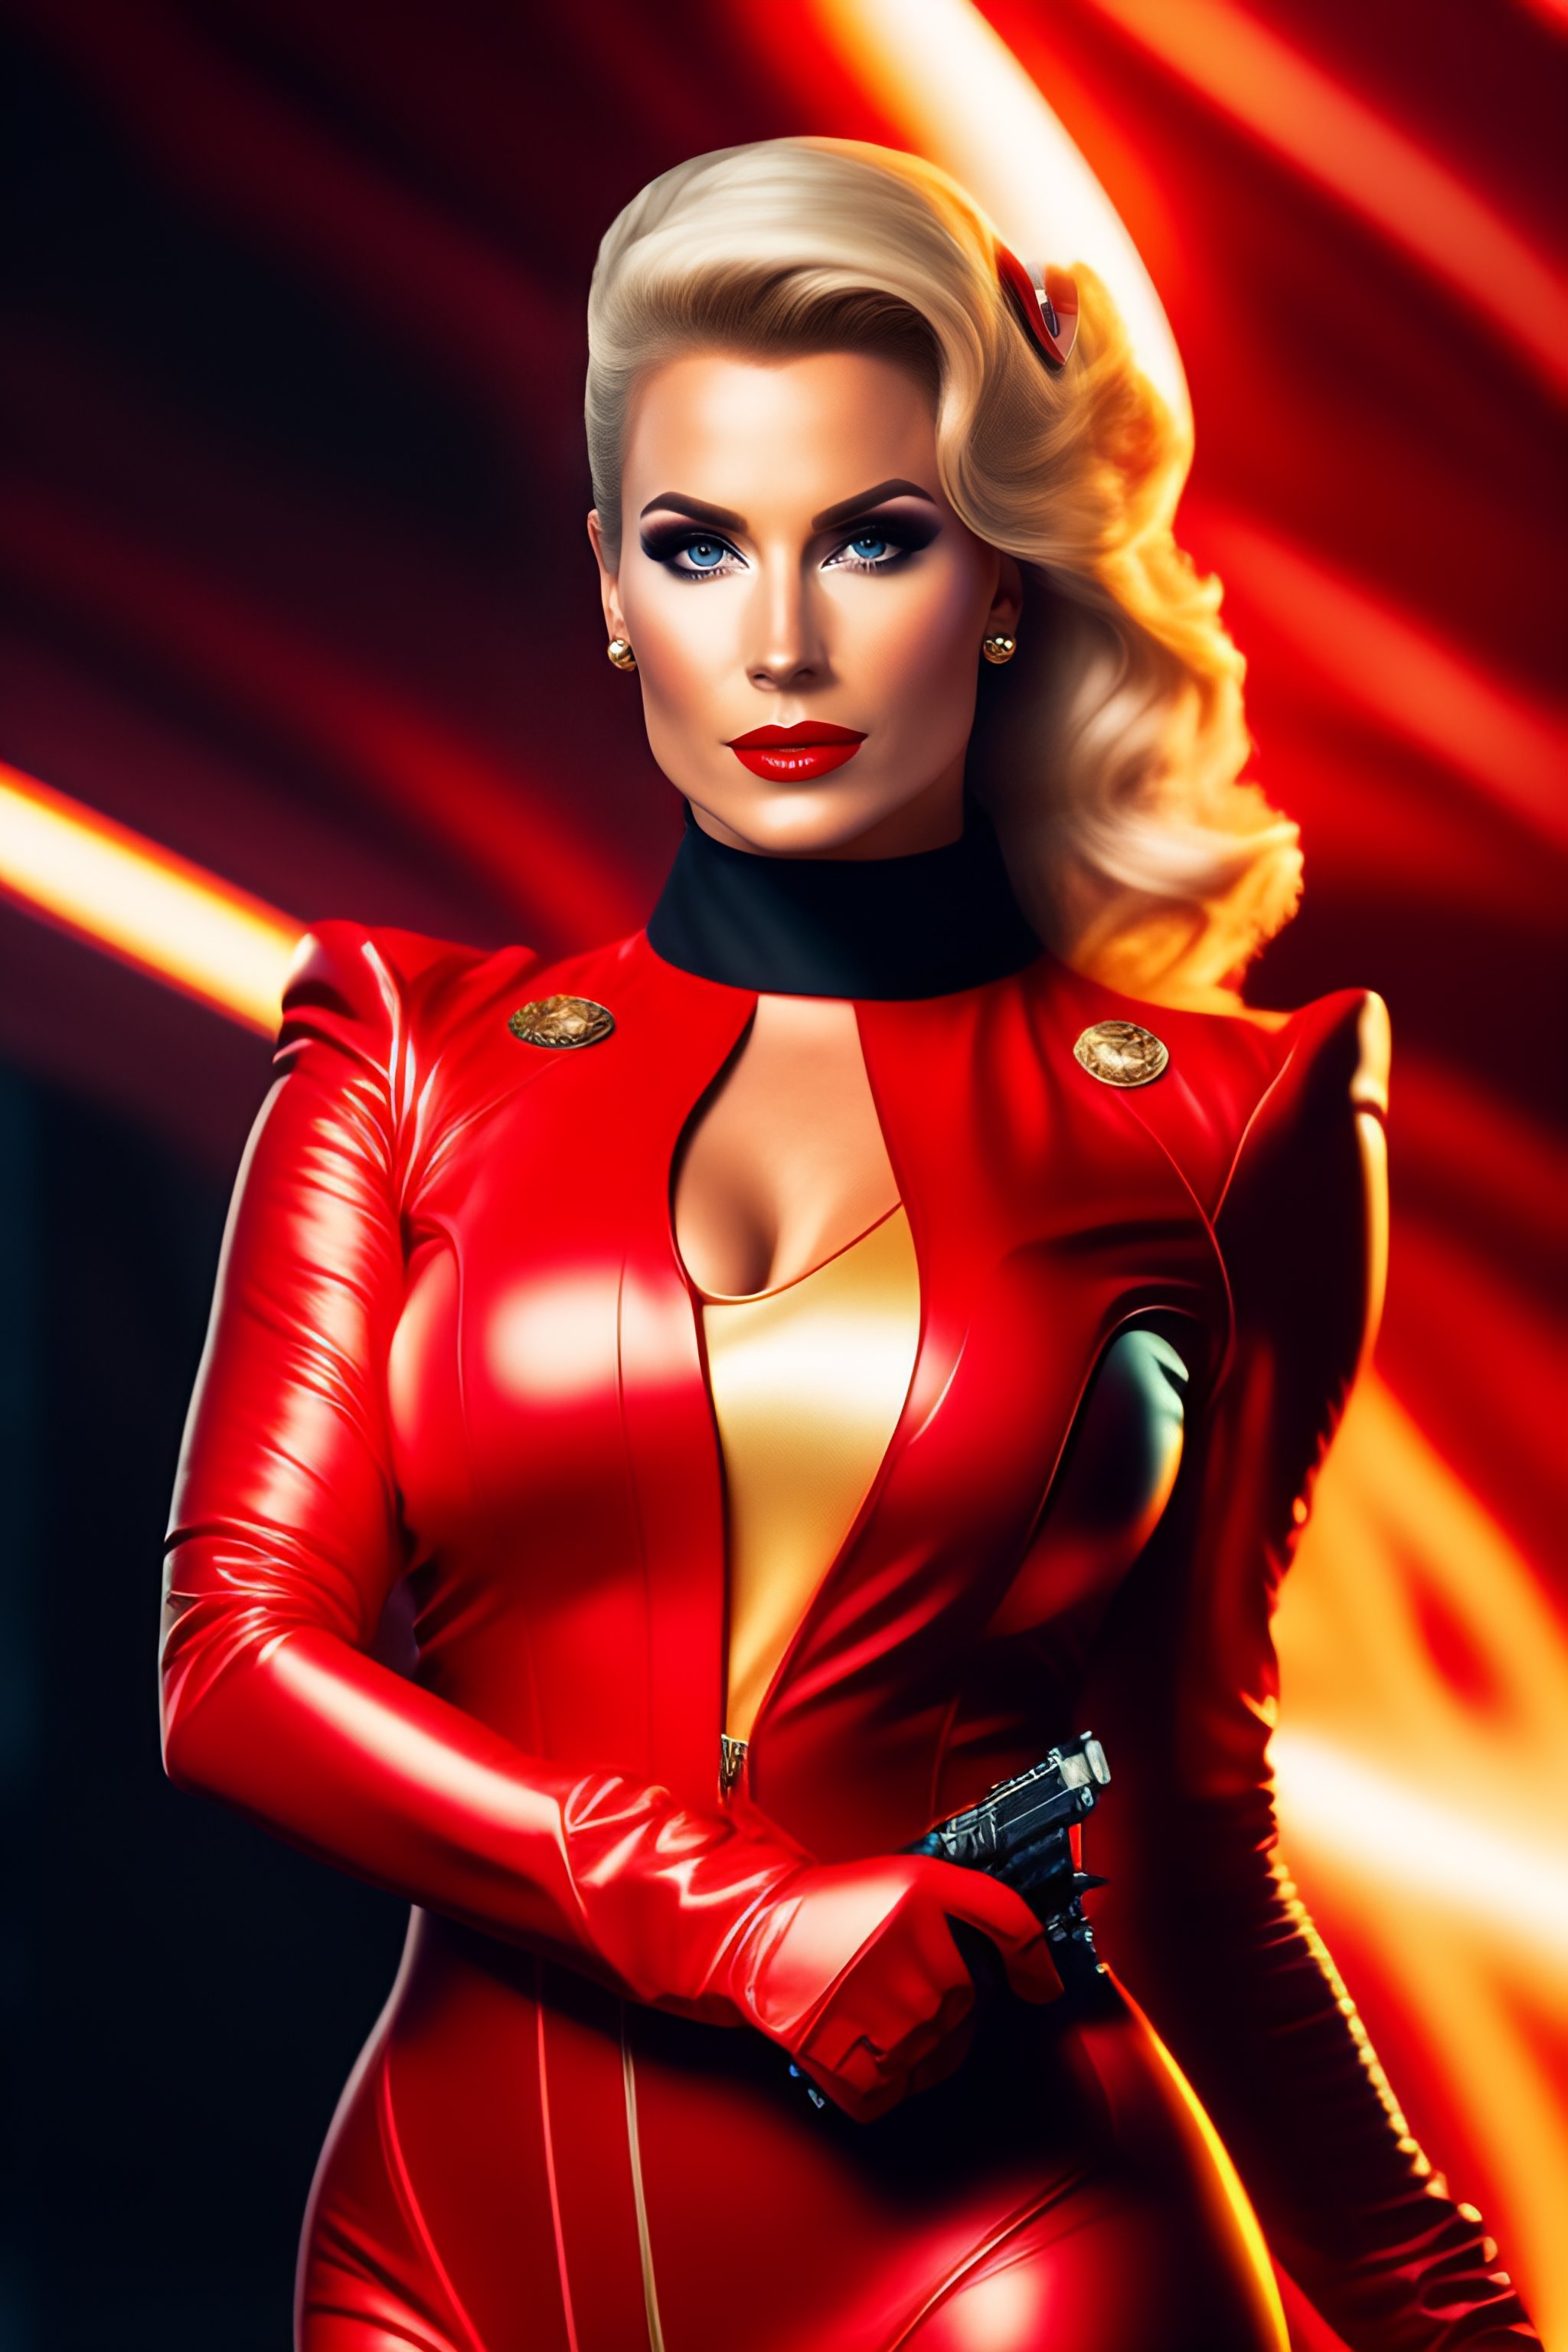 Lexica Full Body Picture Of A Blonde Female Startrek Captain Wearing A Red Black Leather 7395